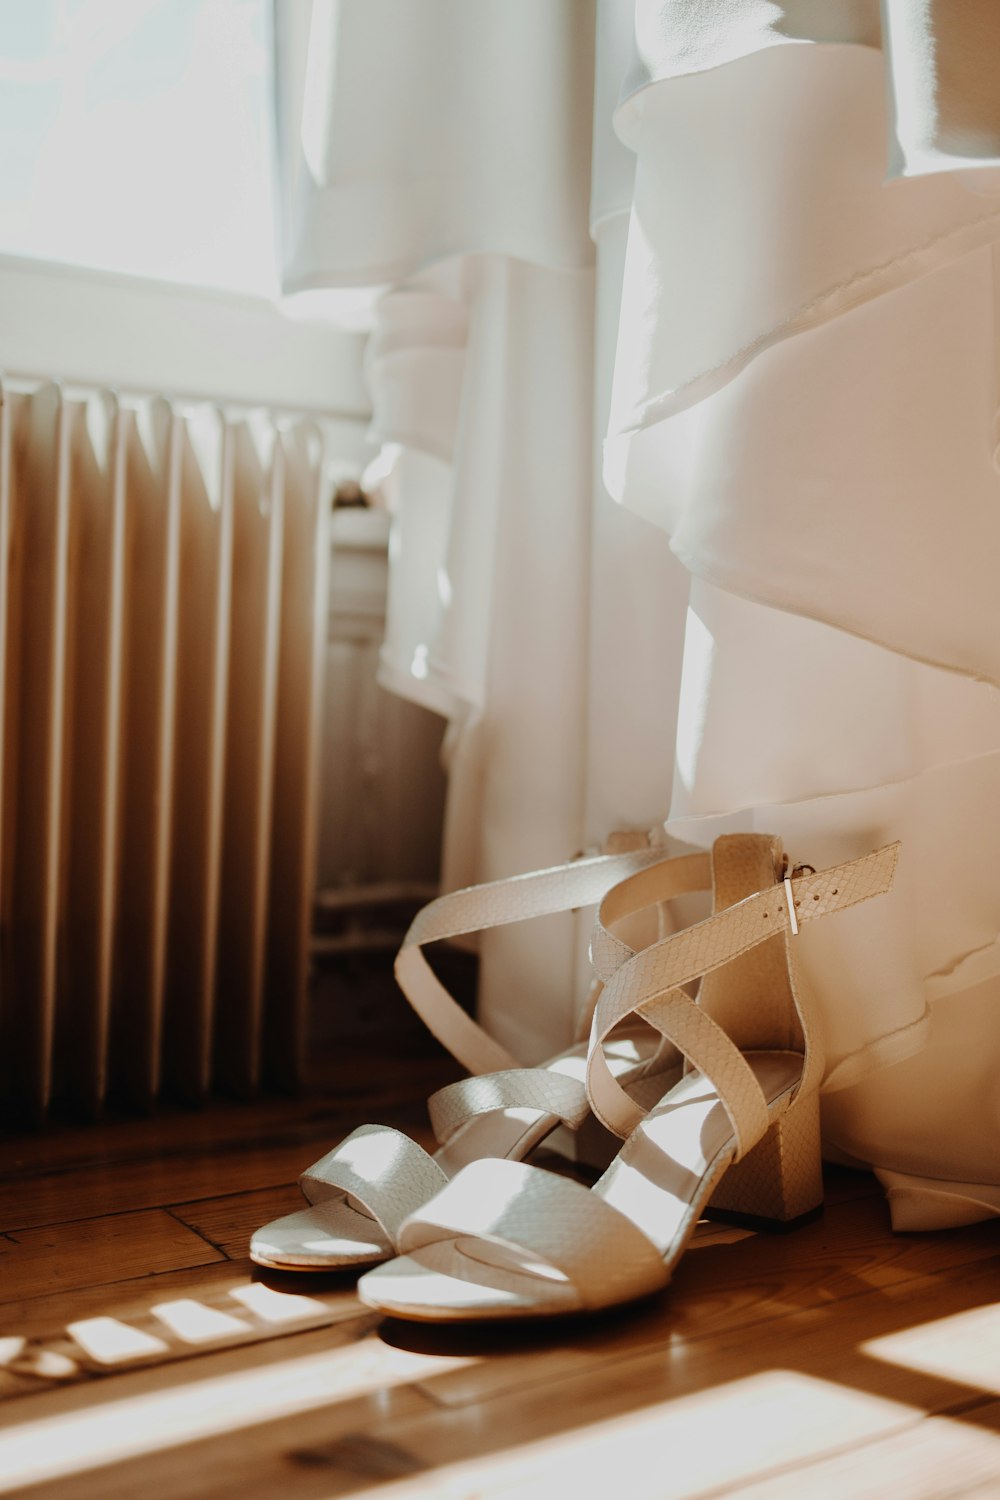 a pair of shoes sitting on the floor next to a radiator